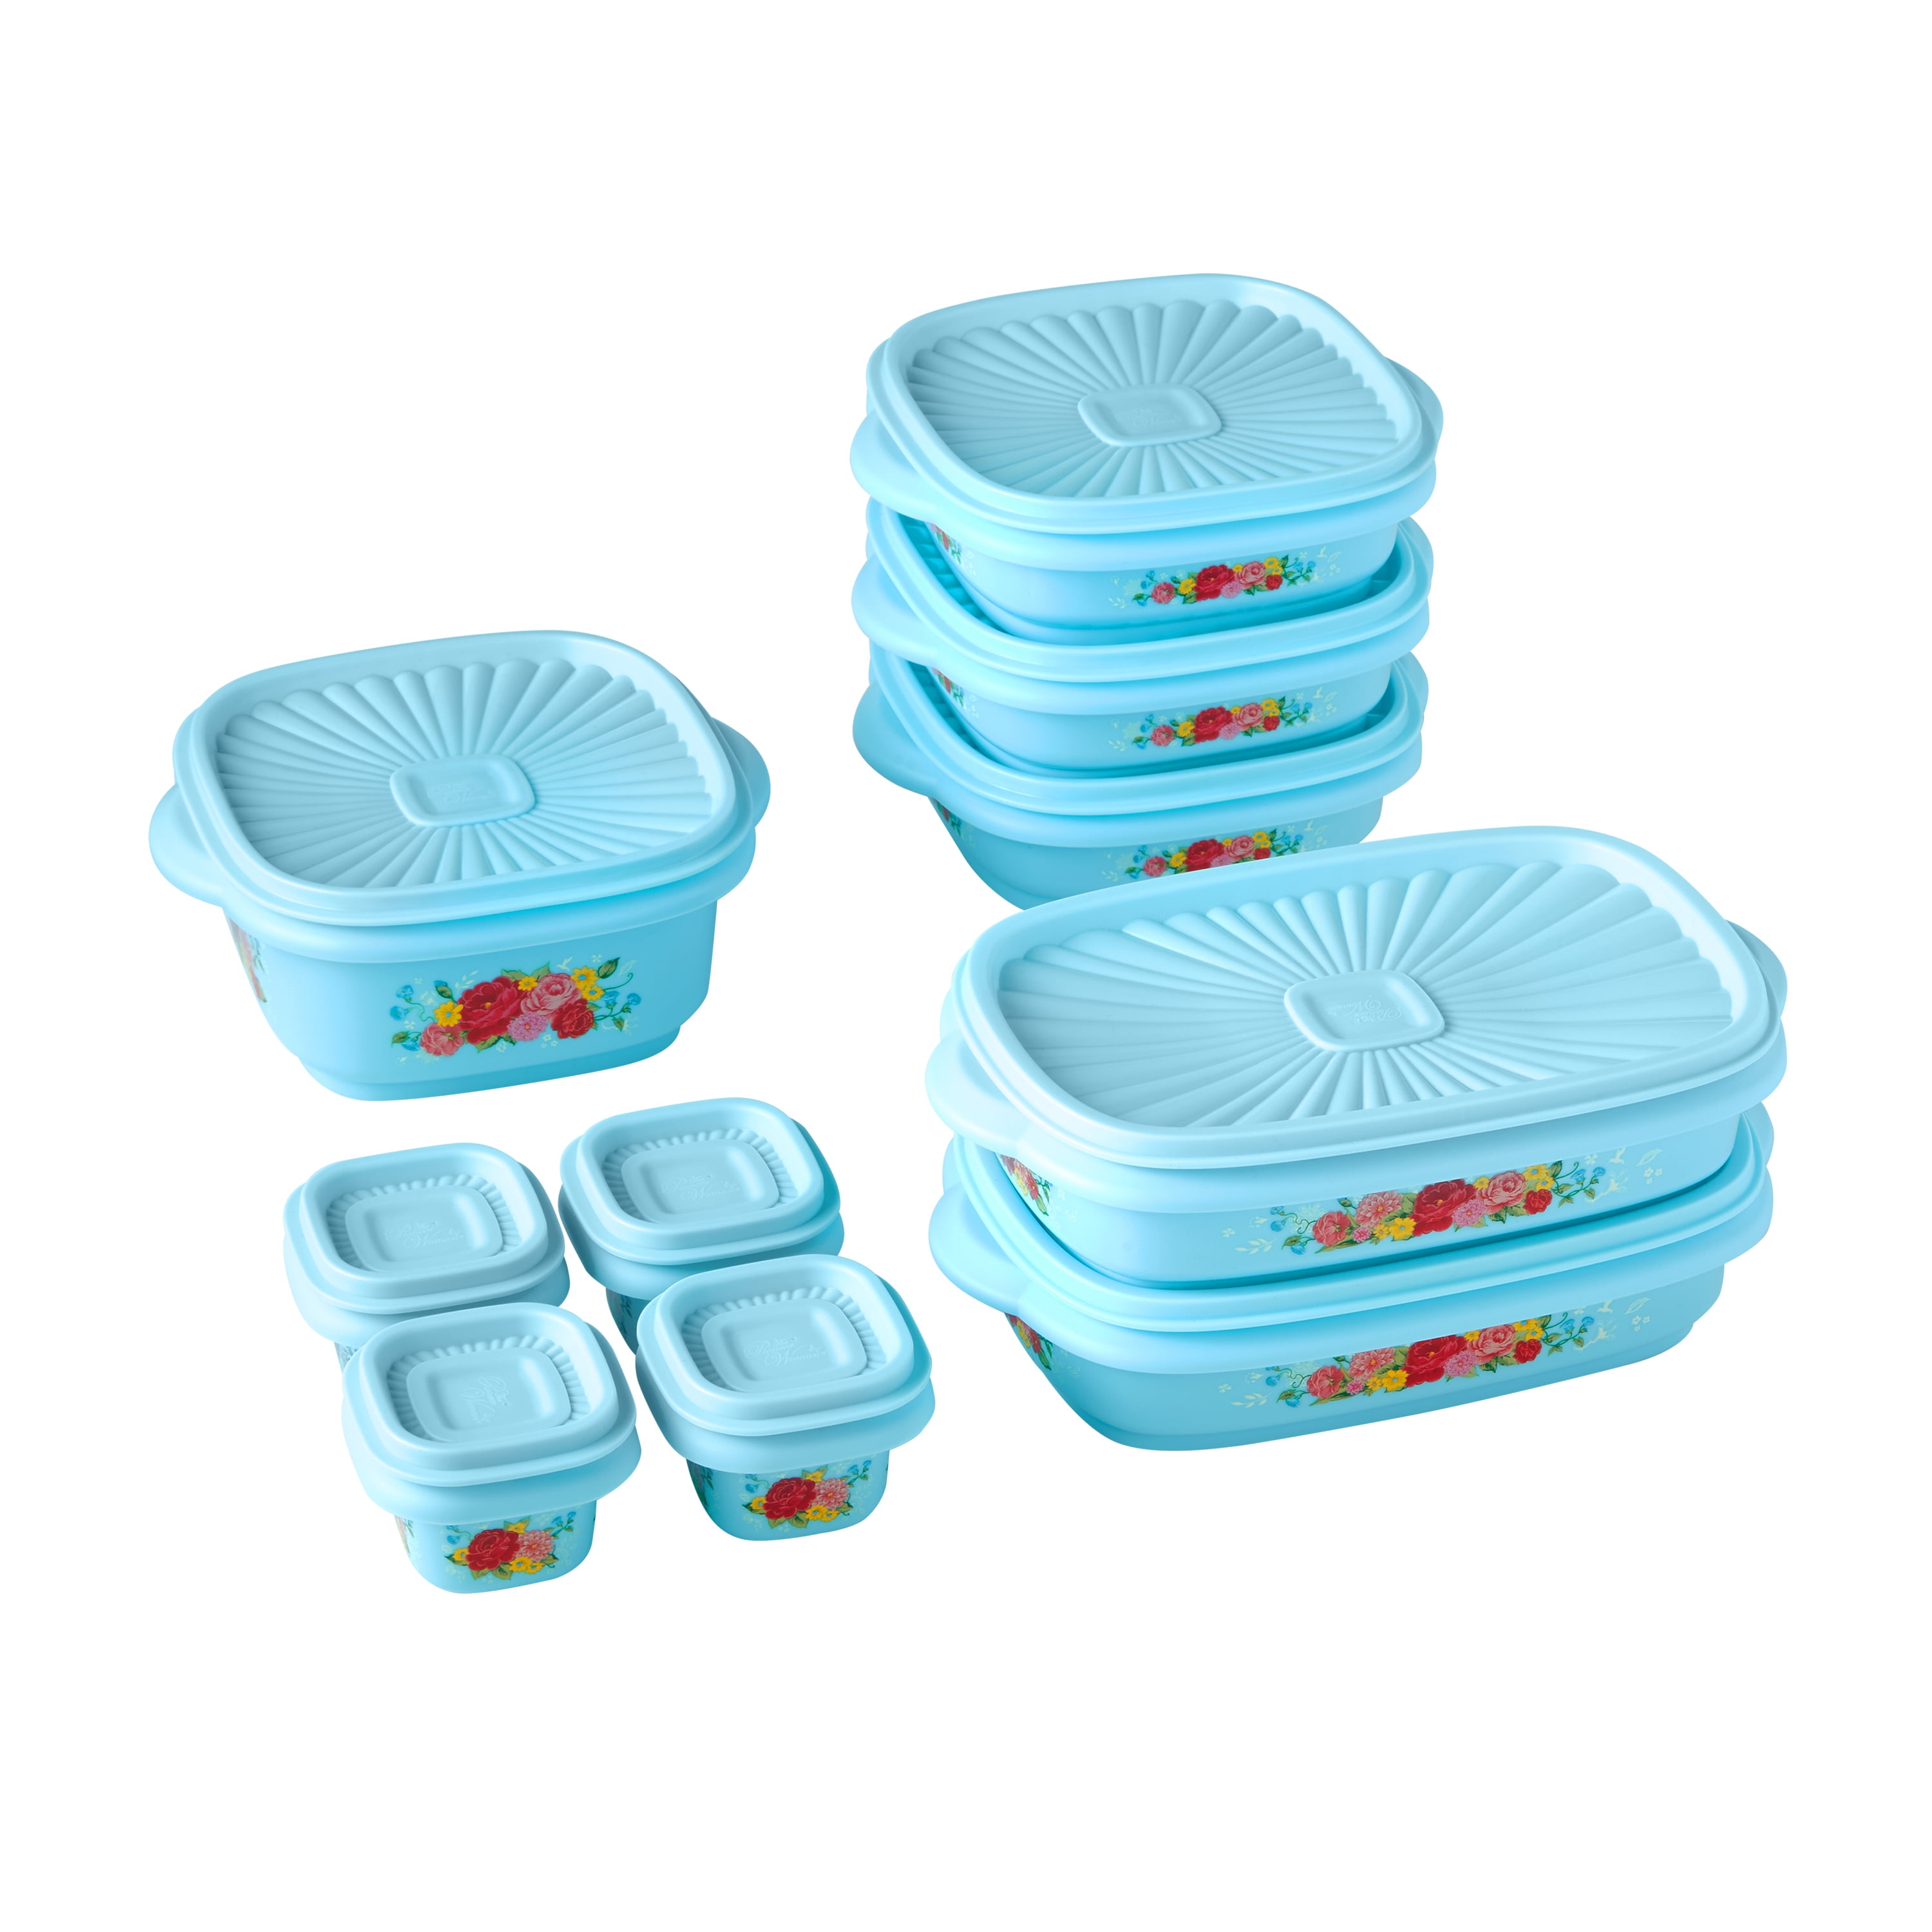 Meal Prep 120-Piece Total Portion Control Containers 1-Year Supply